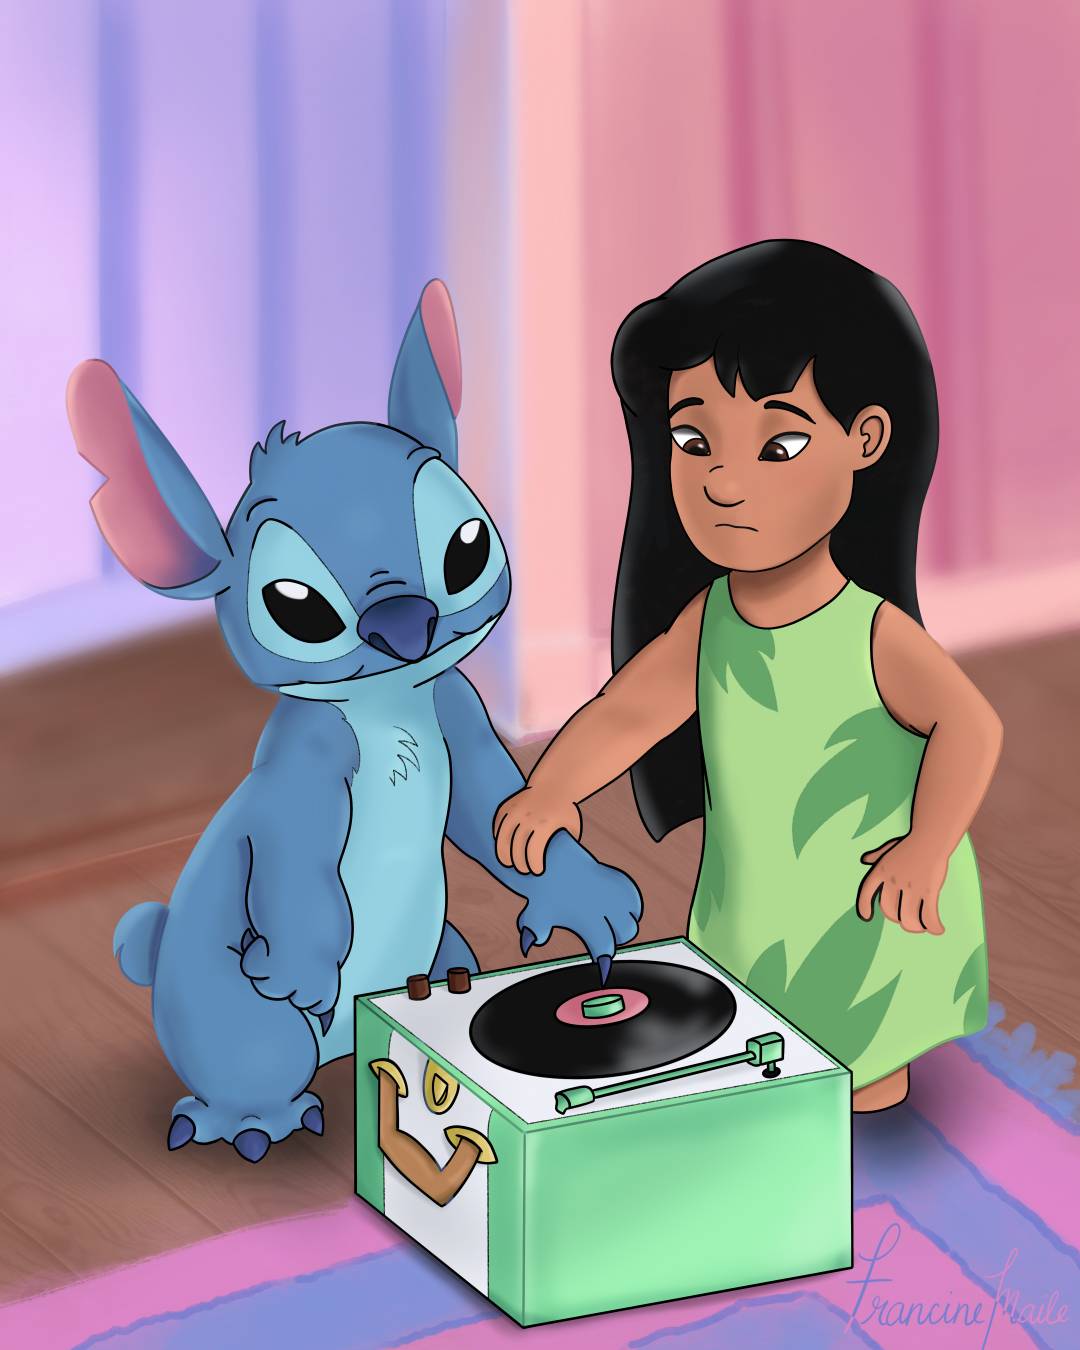 Lilo And Stitch Fans on Instagram: What are you doing now